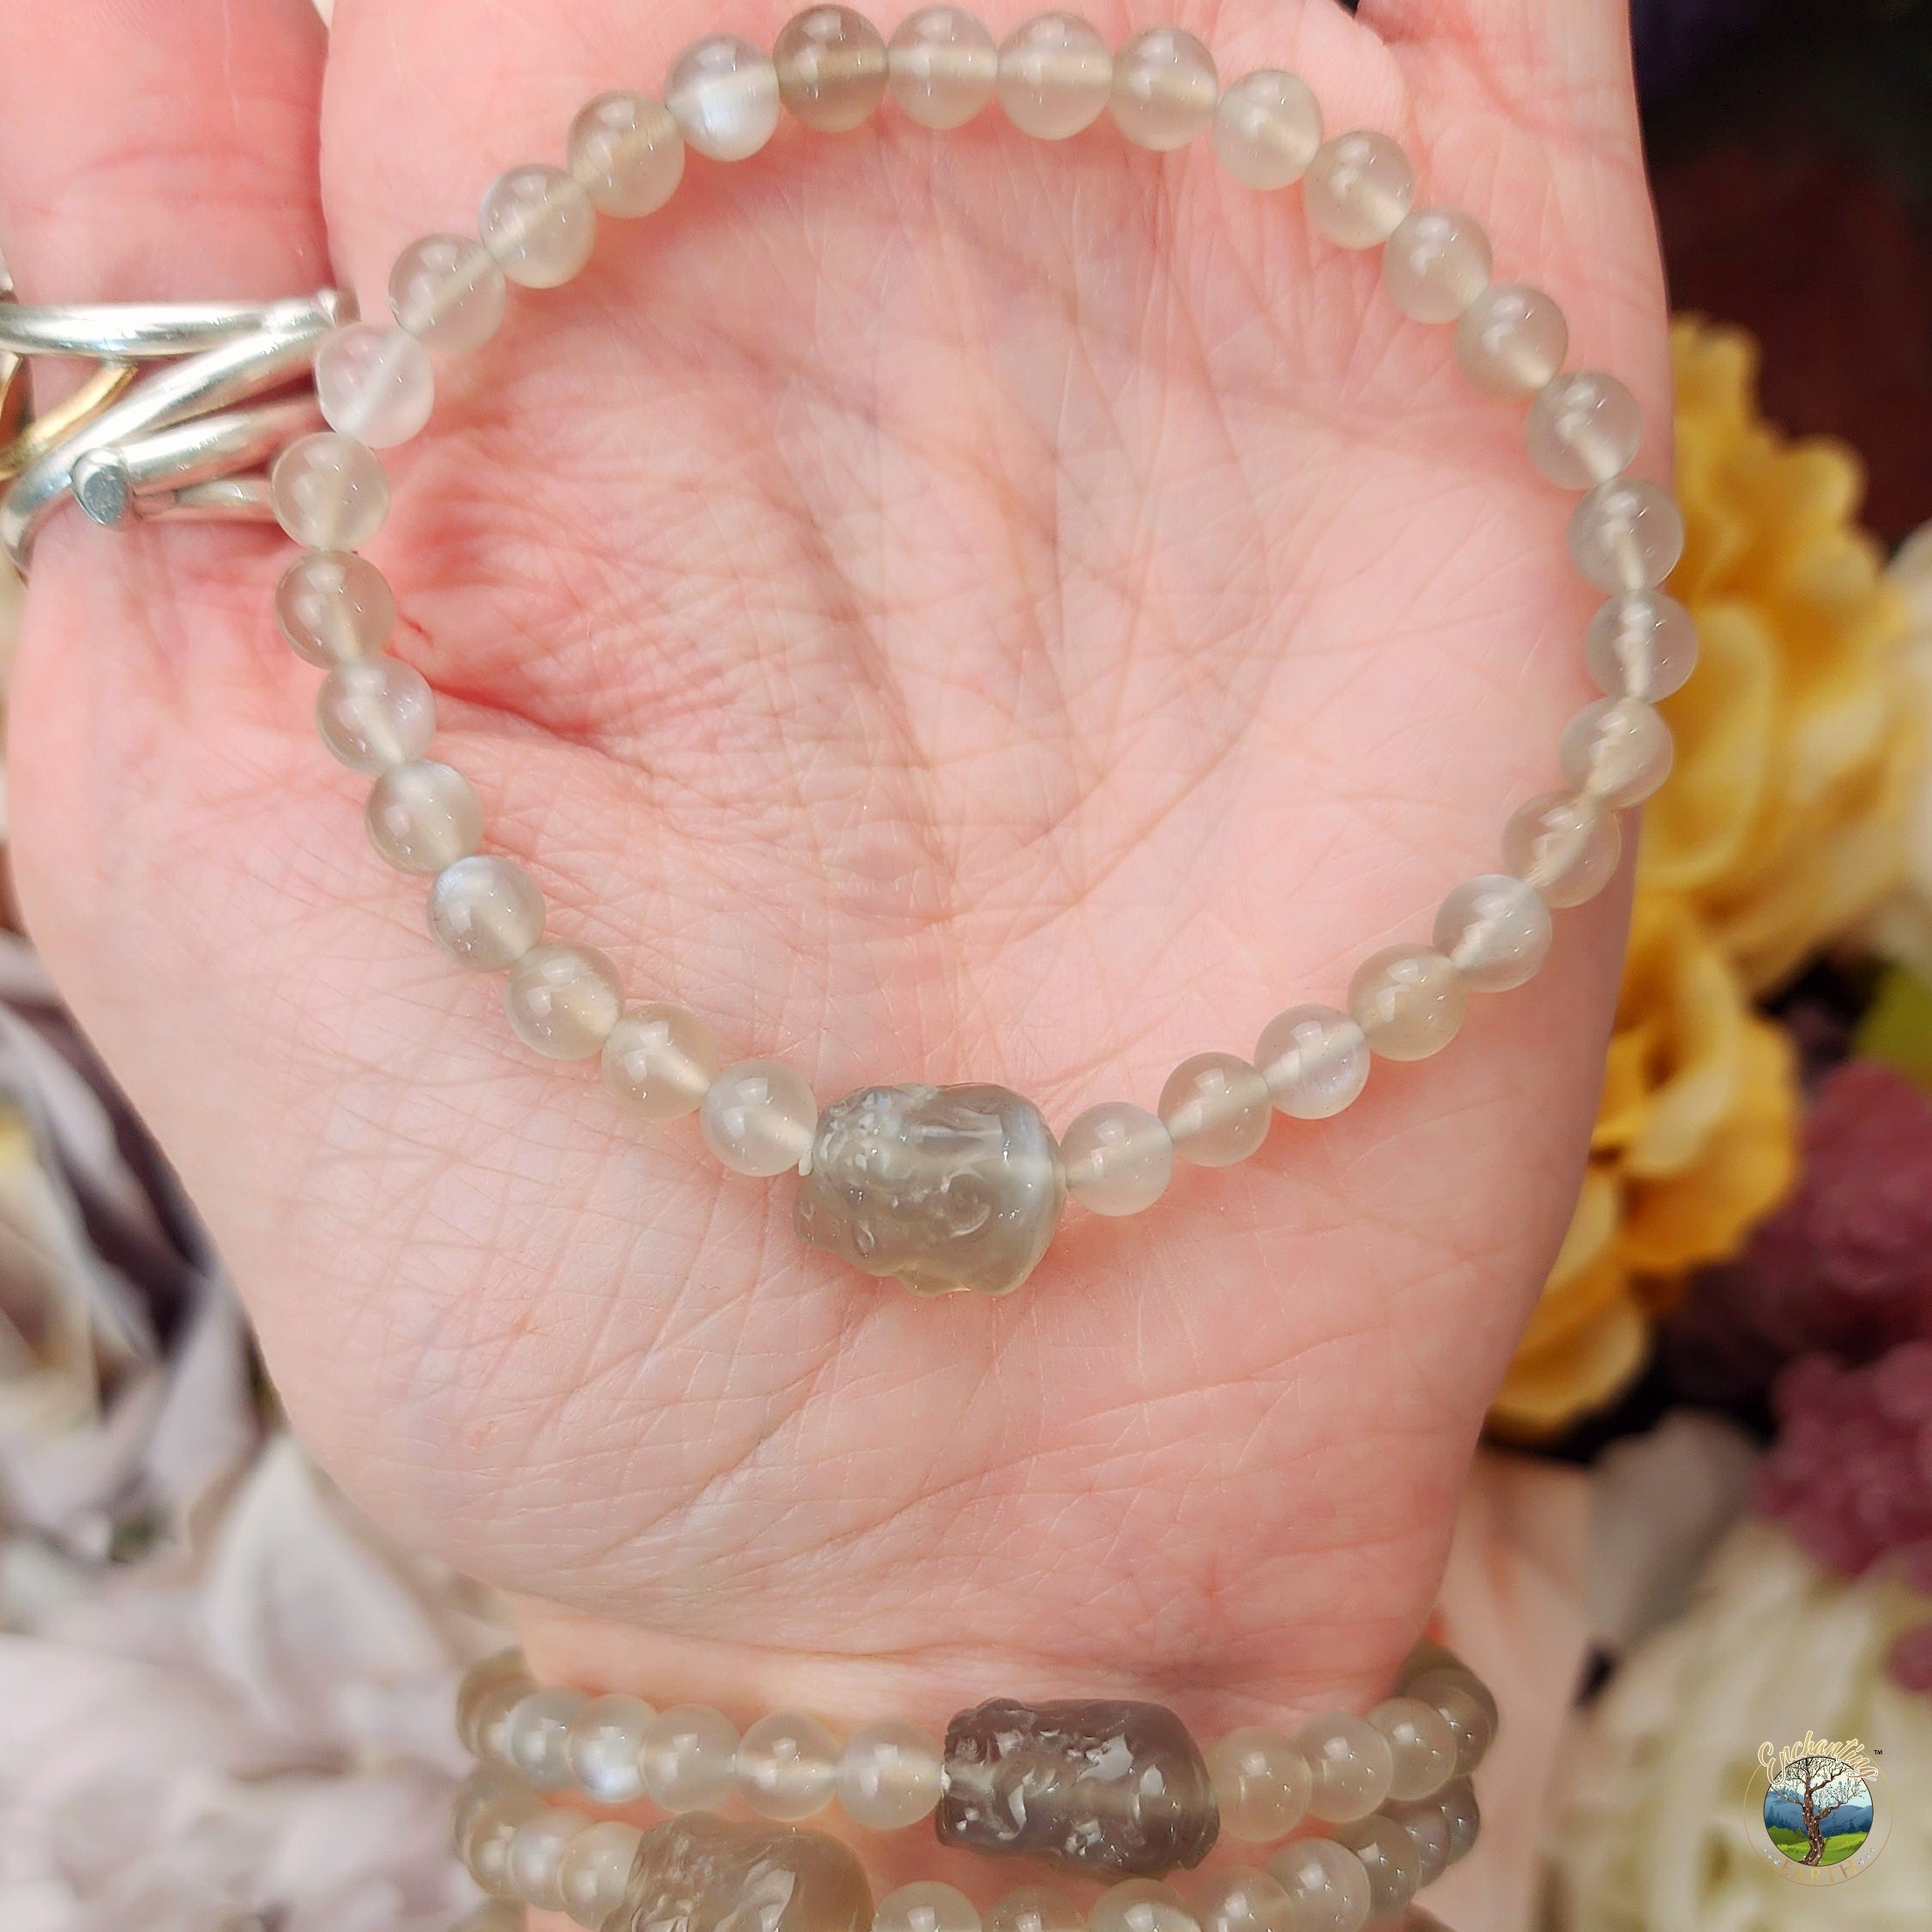 Silver Moonstone Pixiu Bracelet (High Quality) for Embracing the Divine Feminine Inside You and Moon Magic